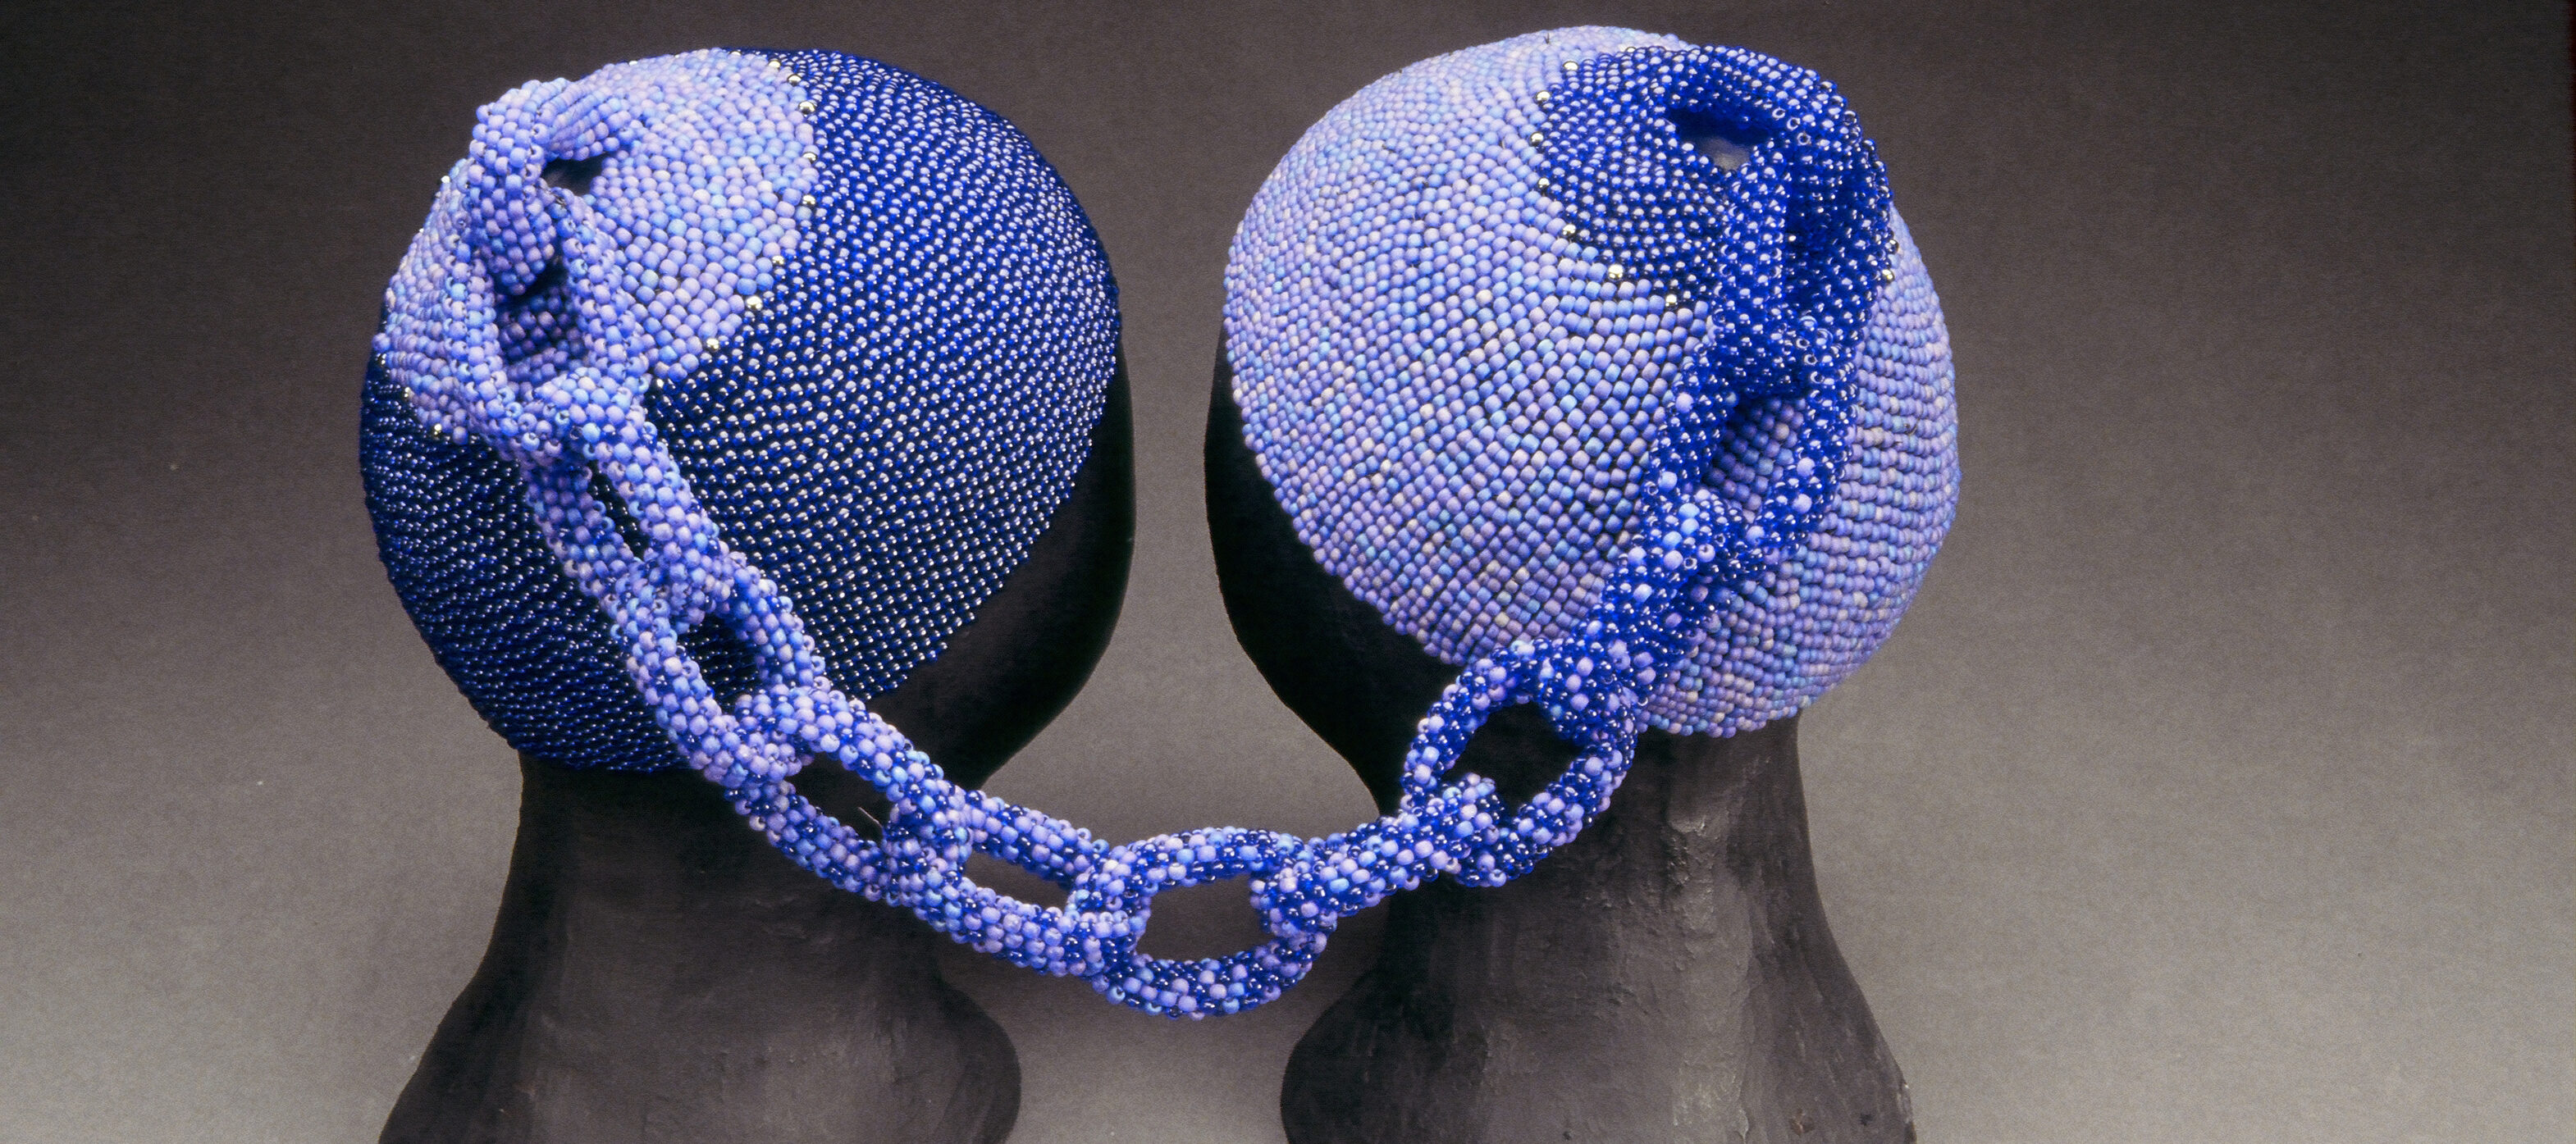 Two head caps made of small, blue glass beads rest on two black mannequin heads. The two caps are connected at the tops by a beaded chain. The left cap is made of darker blue beads and the right cap is made of lighter blue beads. The chain combines both shades.